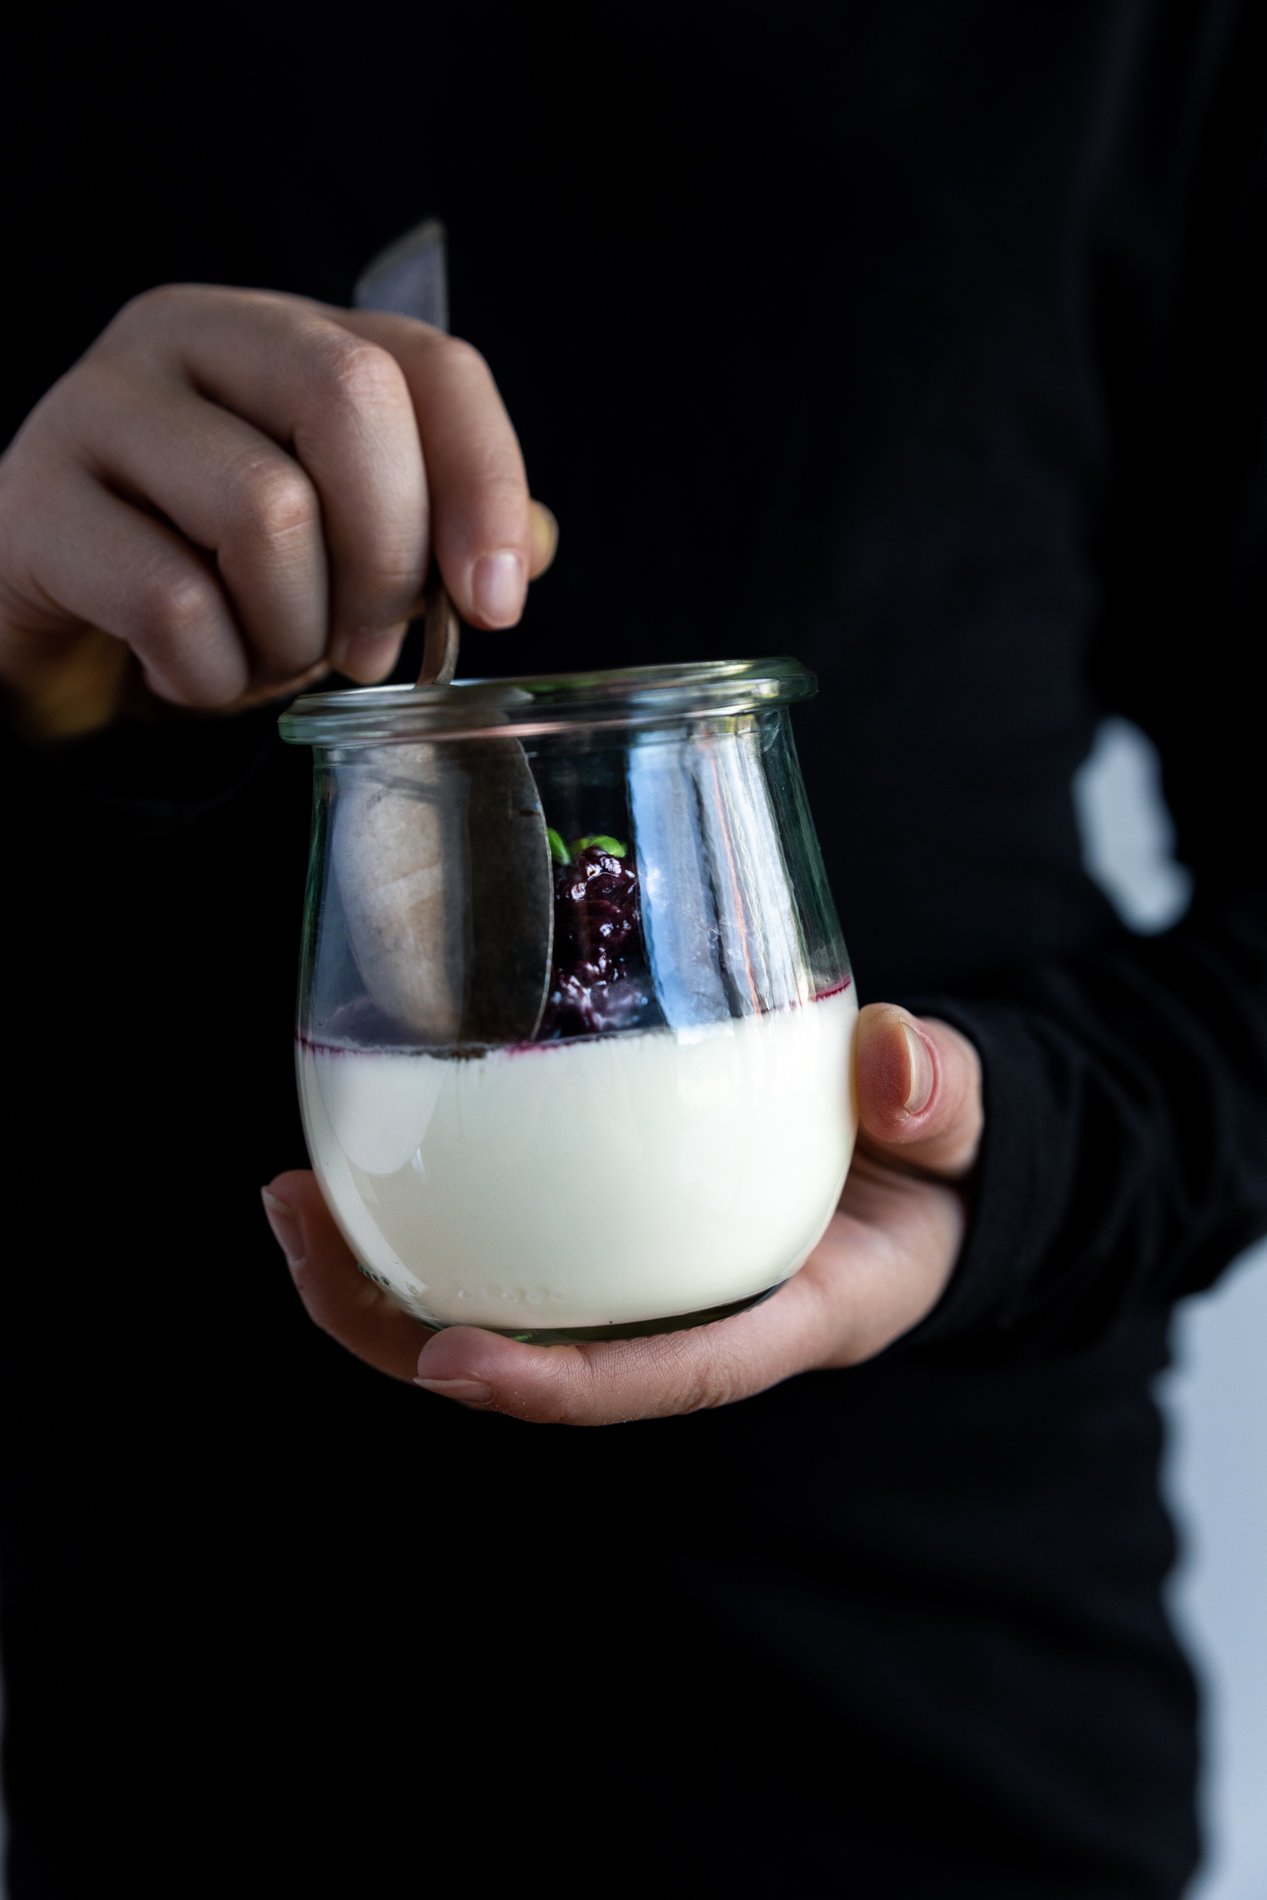 straight-ahead view of a person in a black shirt holding a jar of vanilla bean panna cotta with basil blackberry compote. the right hand is holding a spoon and in the middle of getting a scoop of dessert.